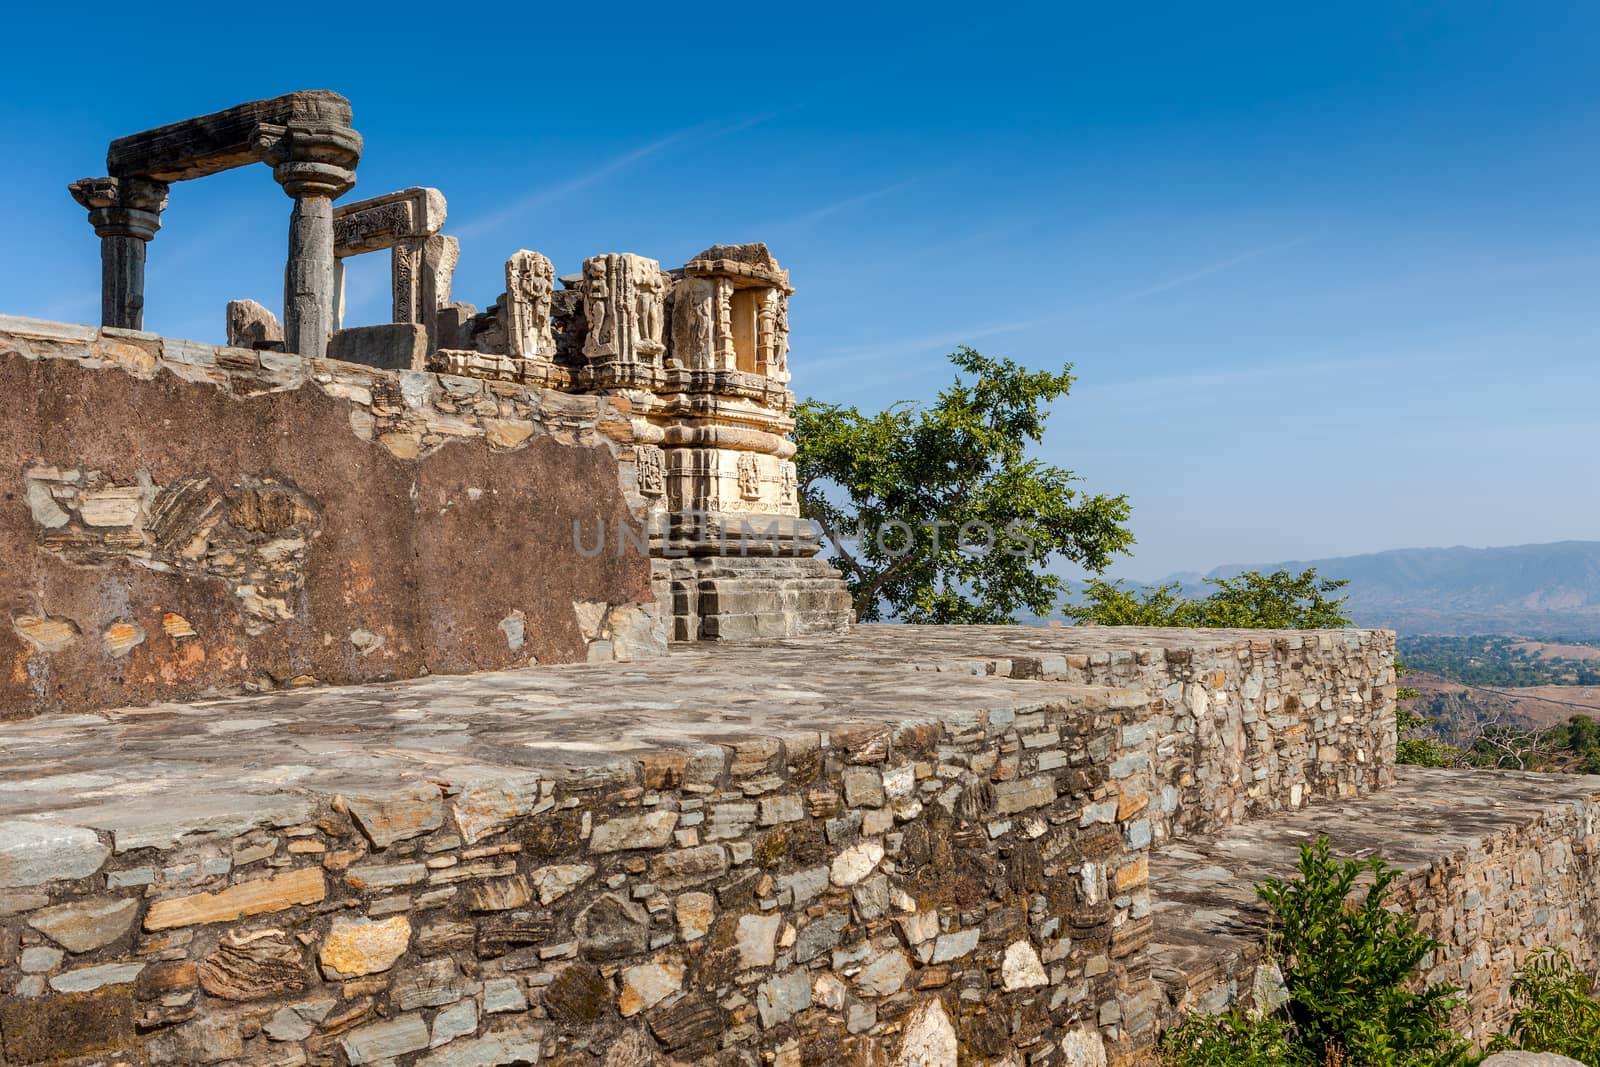 Ruined temple in the Kumbhalgarh fort complex, Rajasthan, India, by vladimir_sklyarov